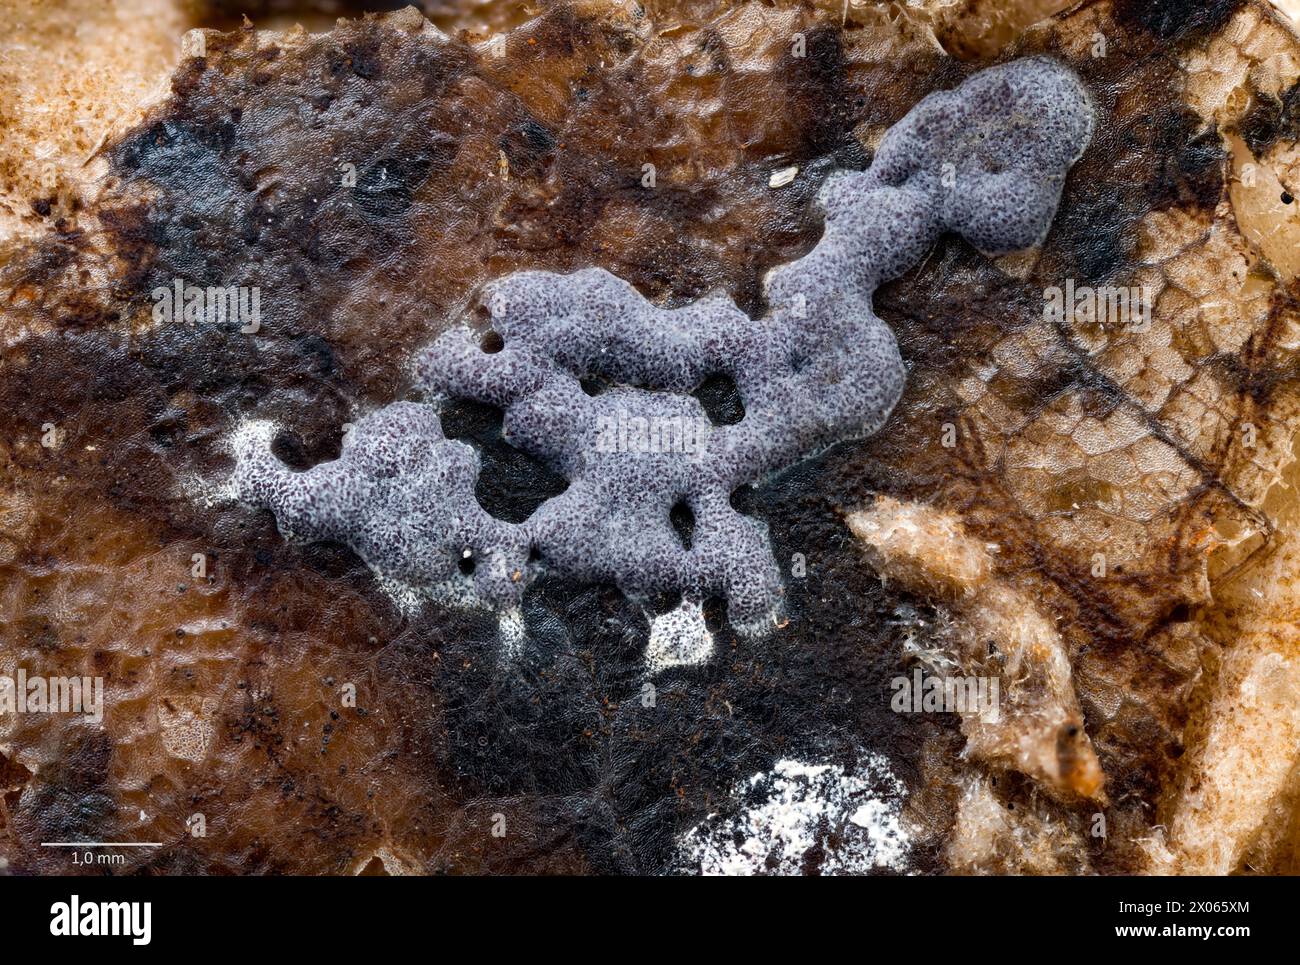 Plasmodial slimemold probably from genus Fuligo. Growing from decaying leaf (Acer sp.) after 5 months in culture. South-western Norway. Stock Photo